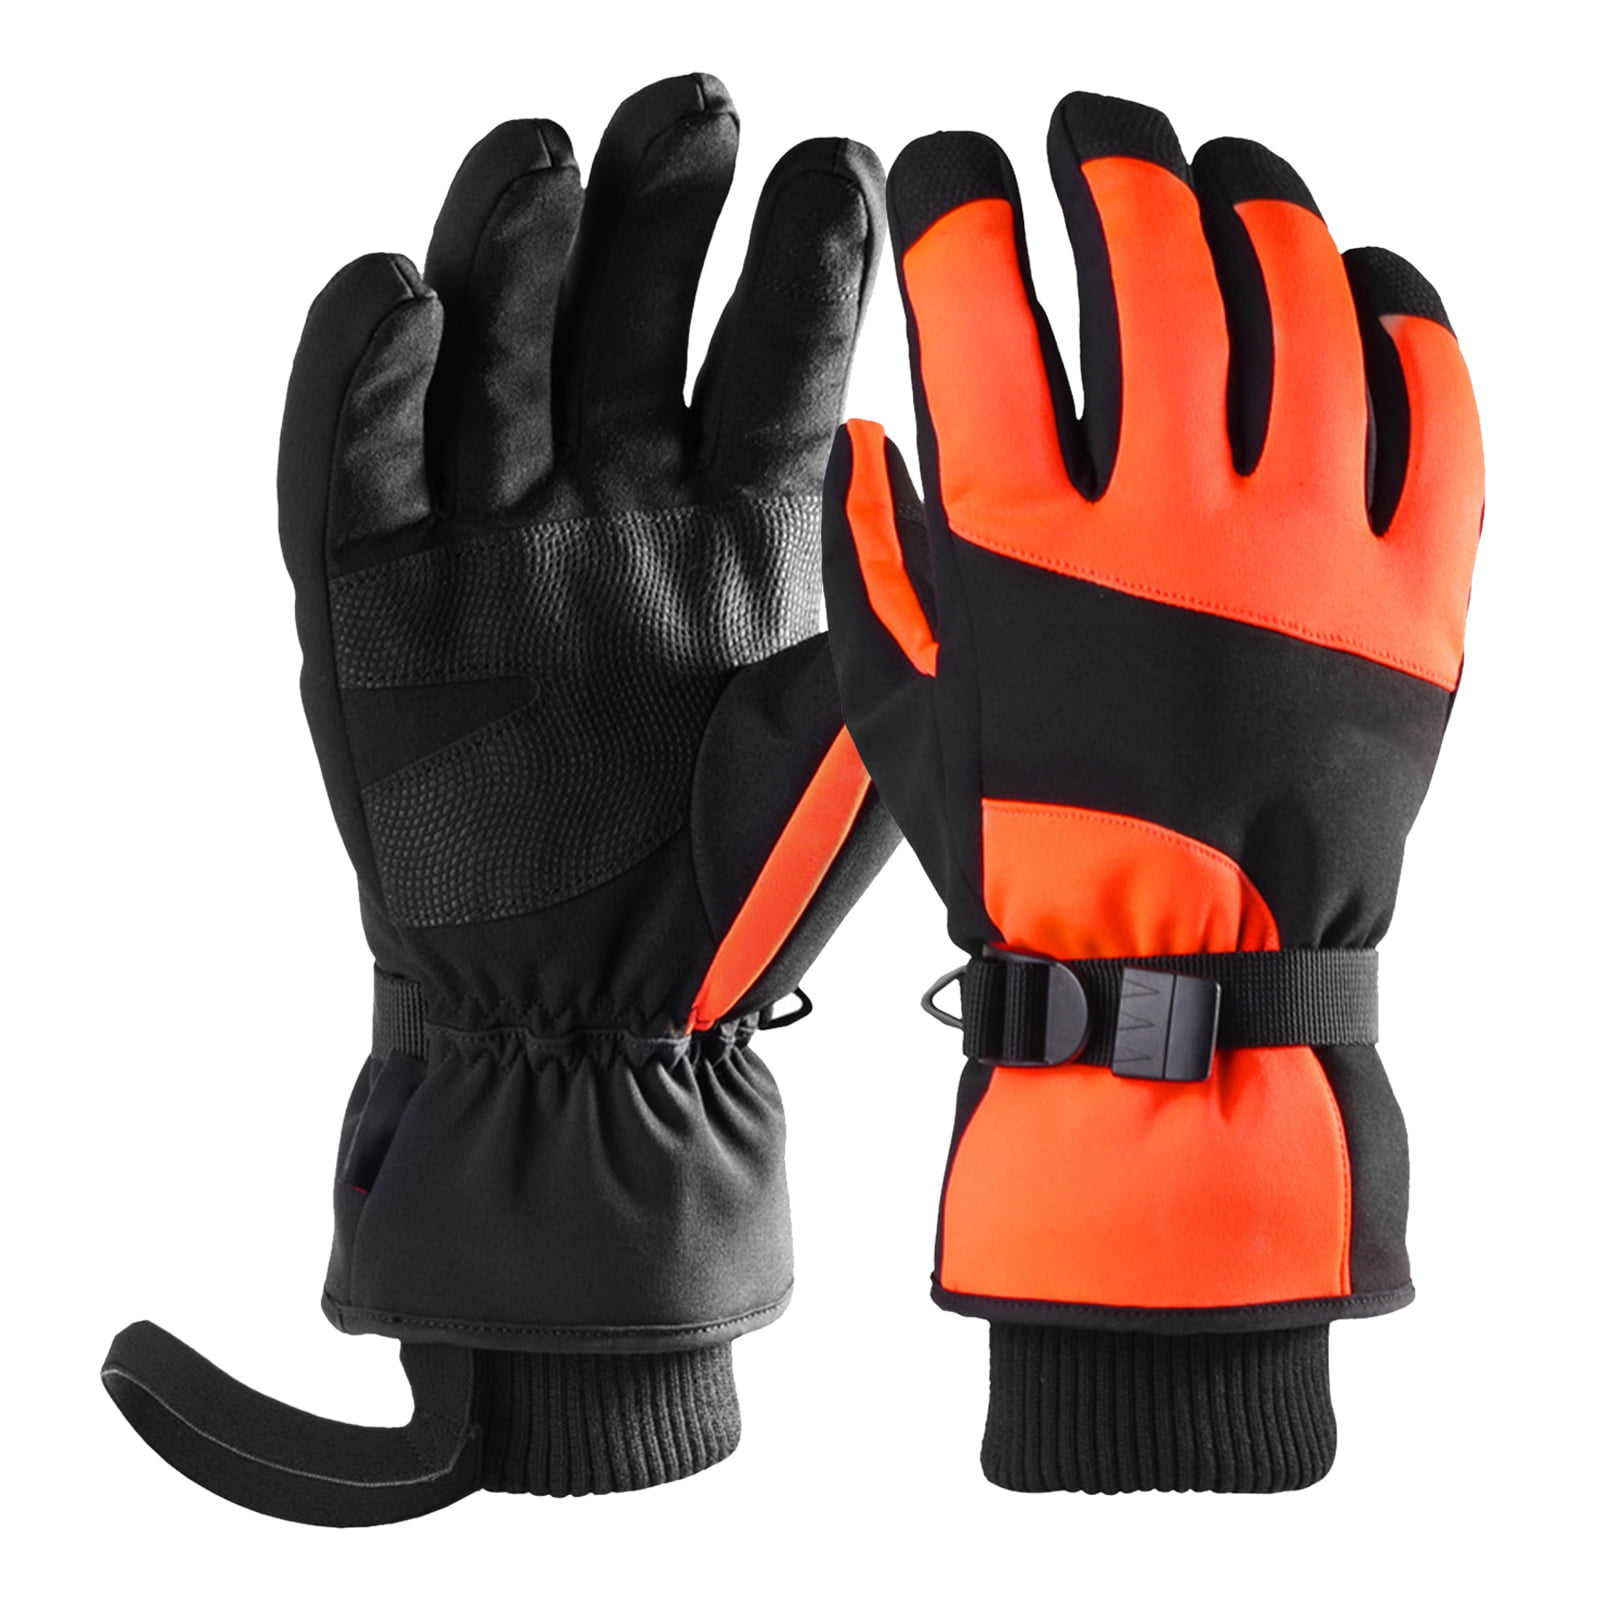 Details about   Ski & Snow Gloves Waterproof & Windproof Winter Snowboard Gloves for Men & Wom 